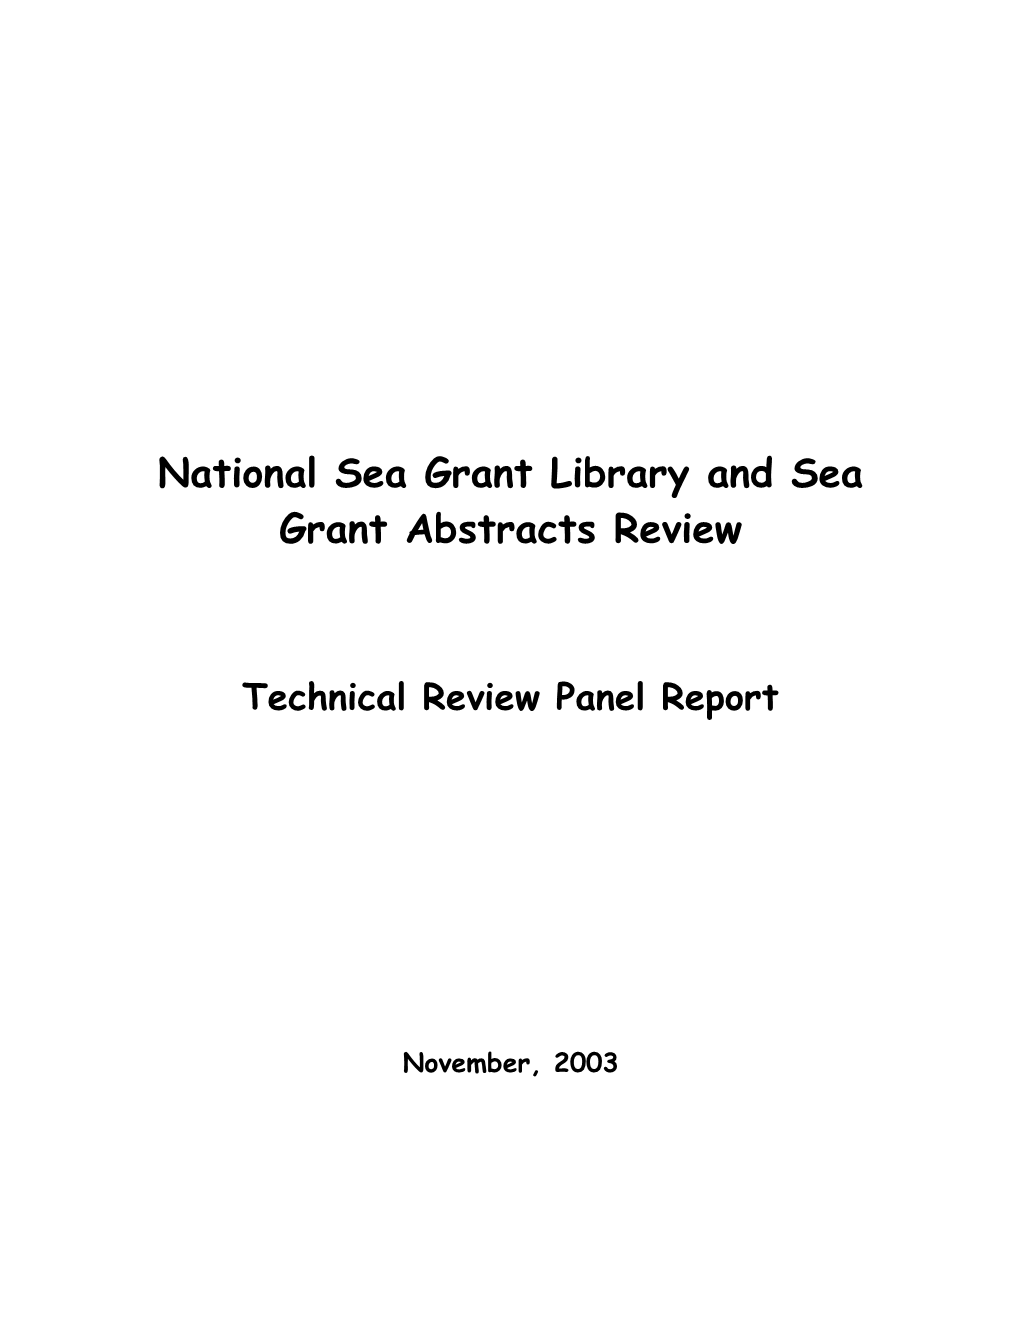 National Sea Grant Library and Sea Grant Abstracts Review